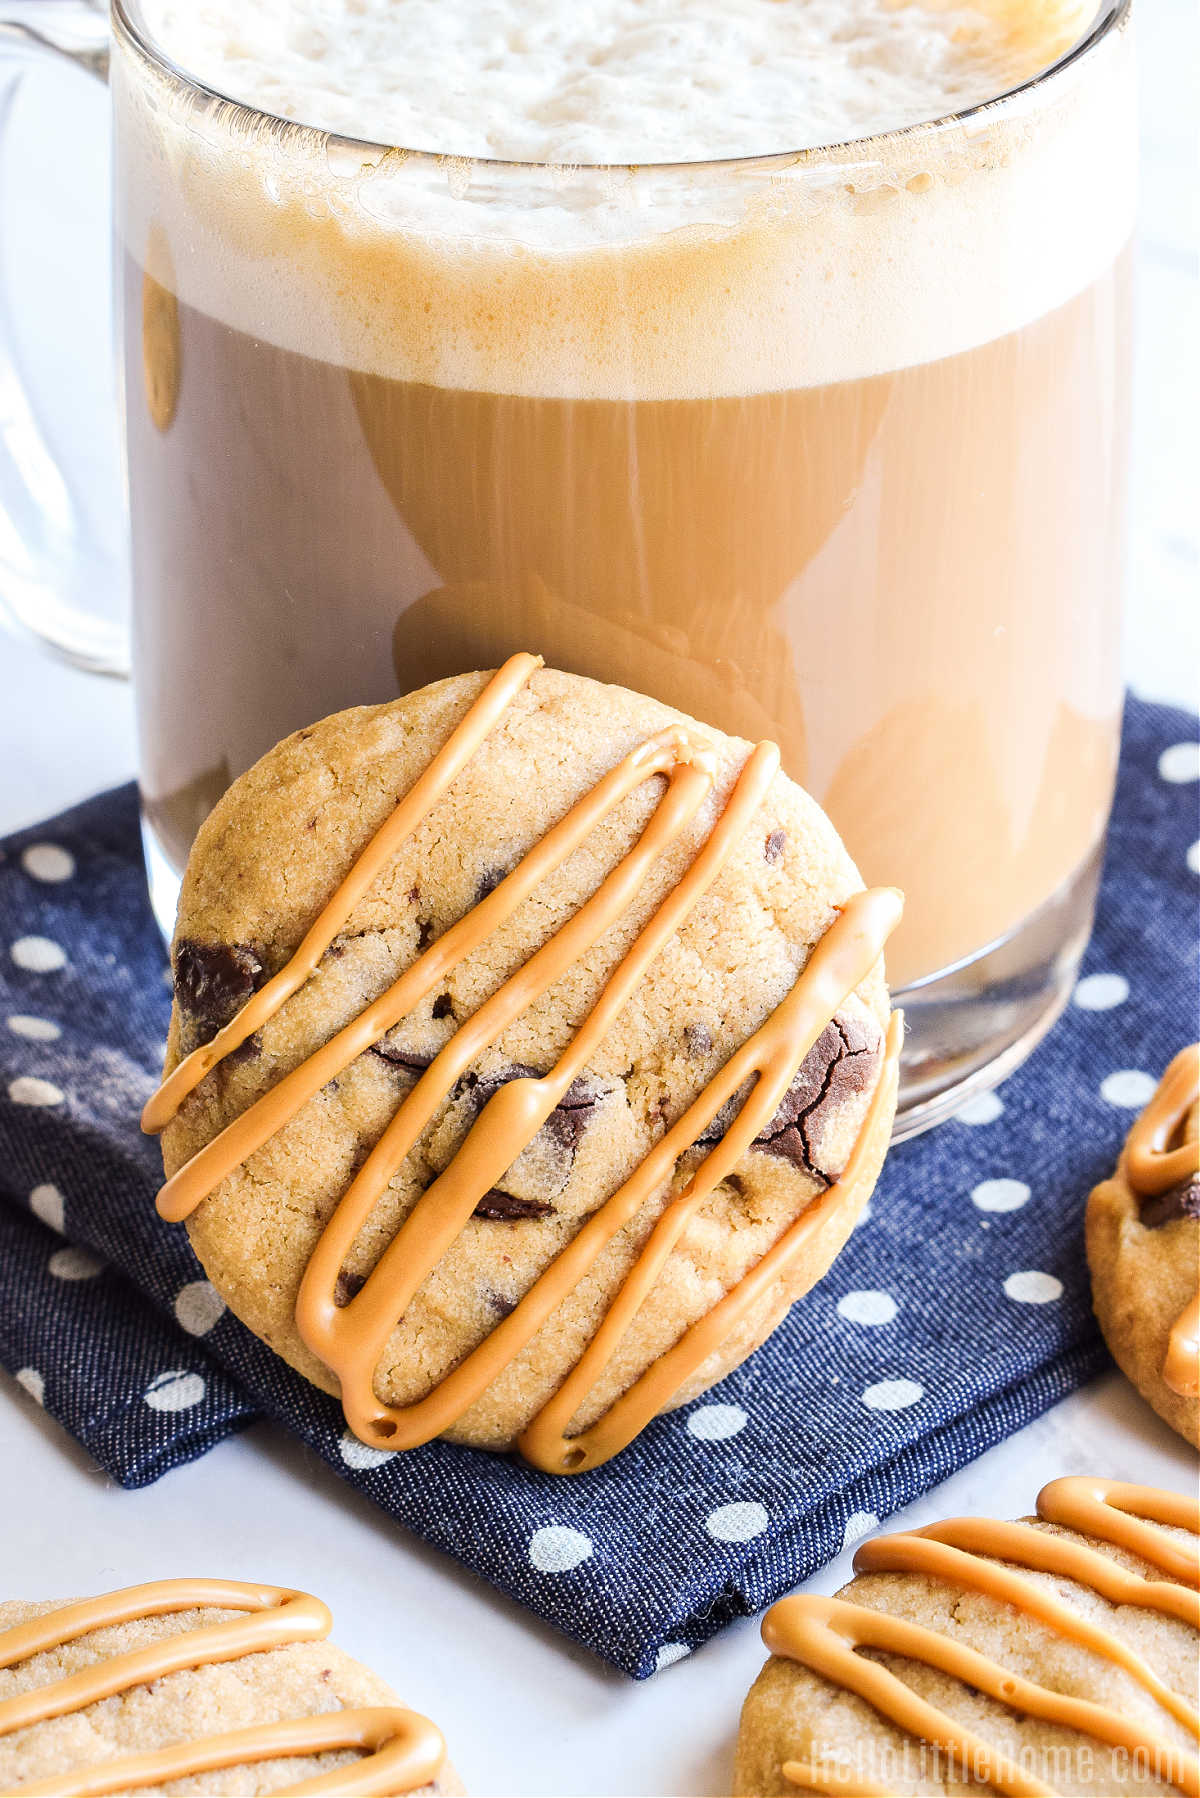 A Coffee Chocolate Cookie leaning against a latte.